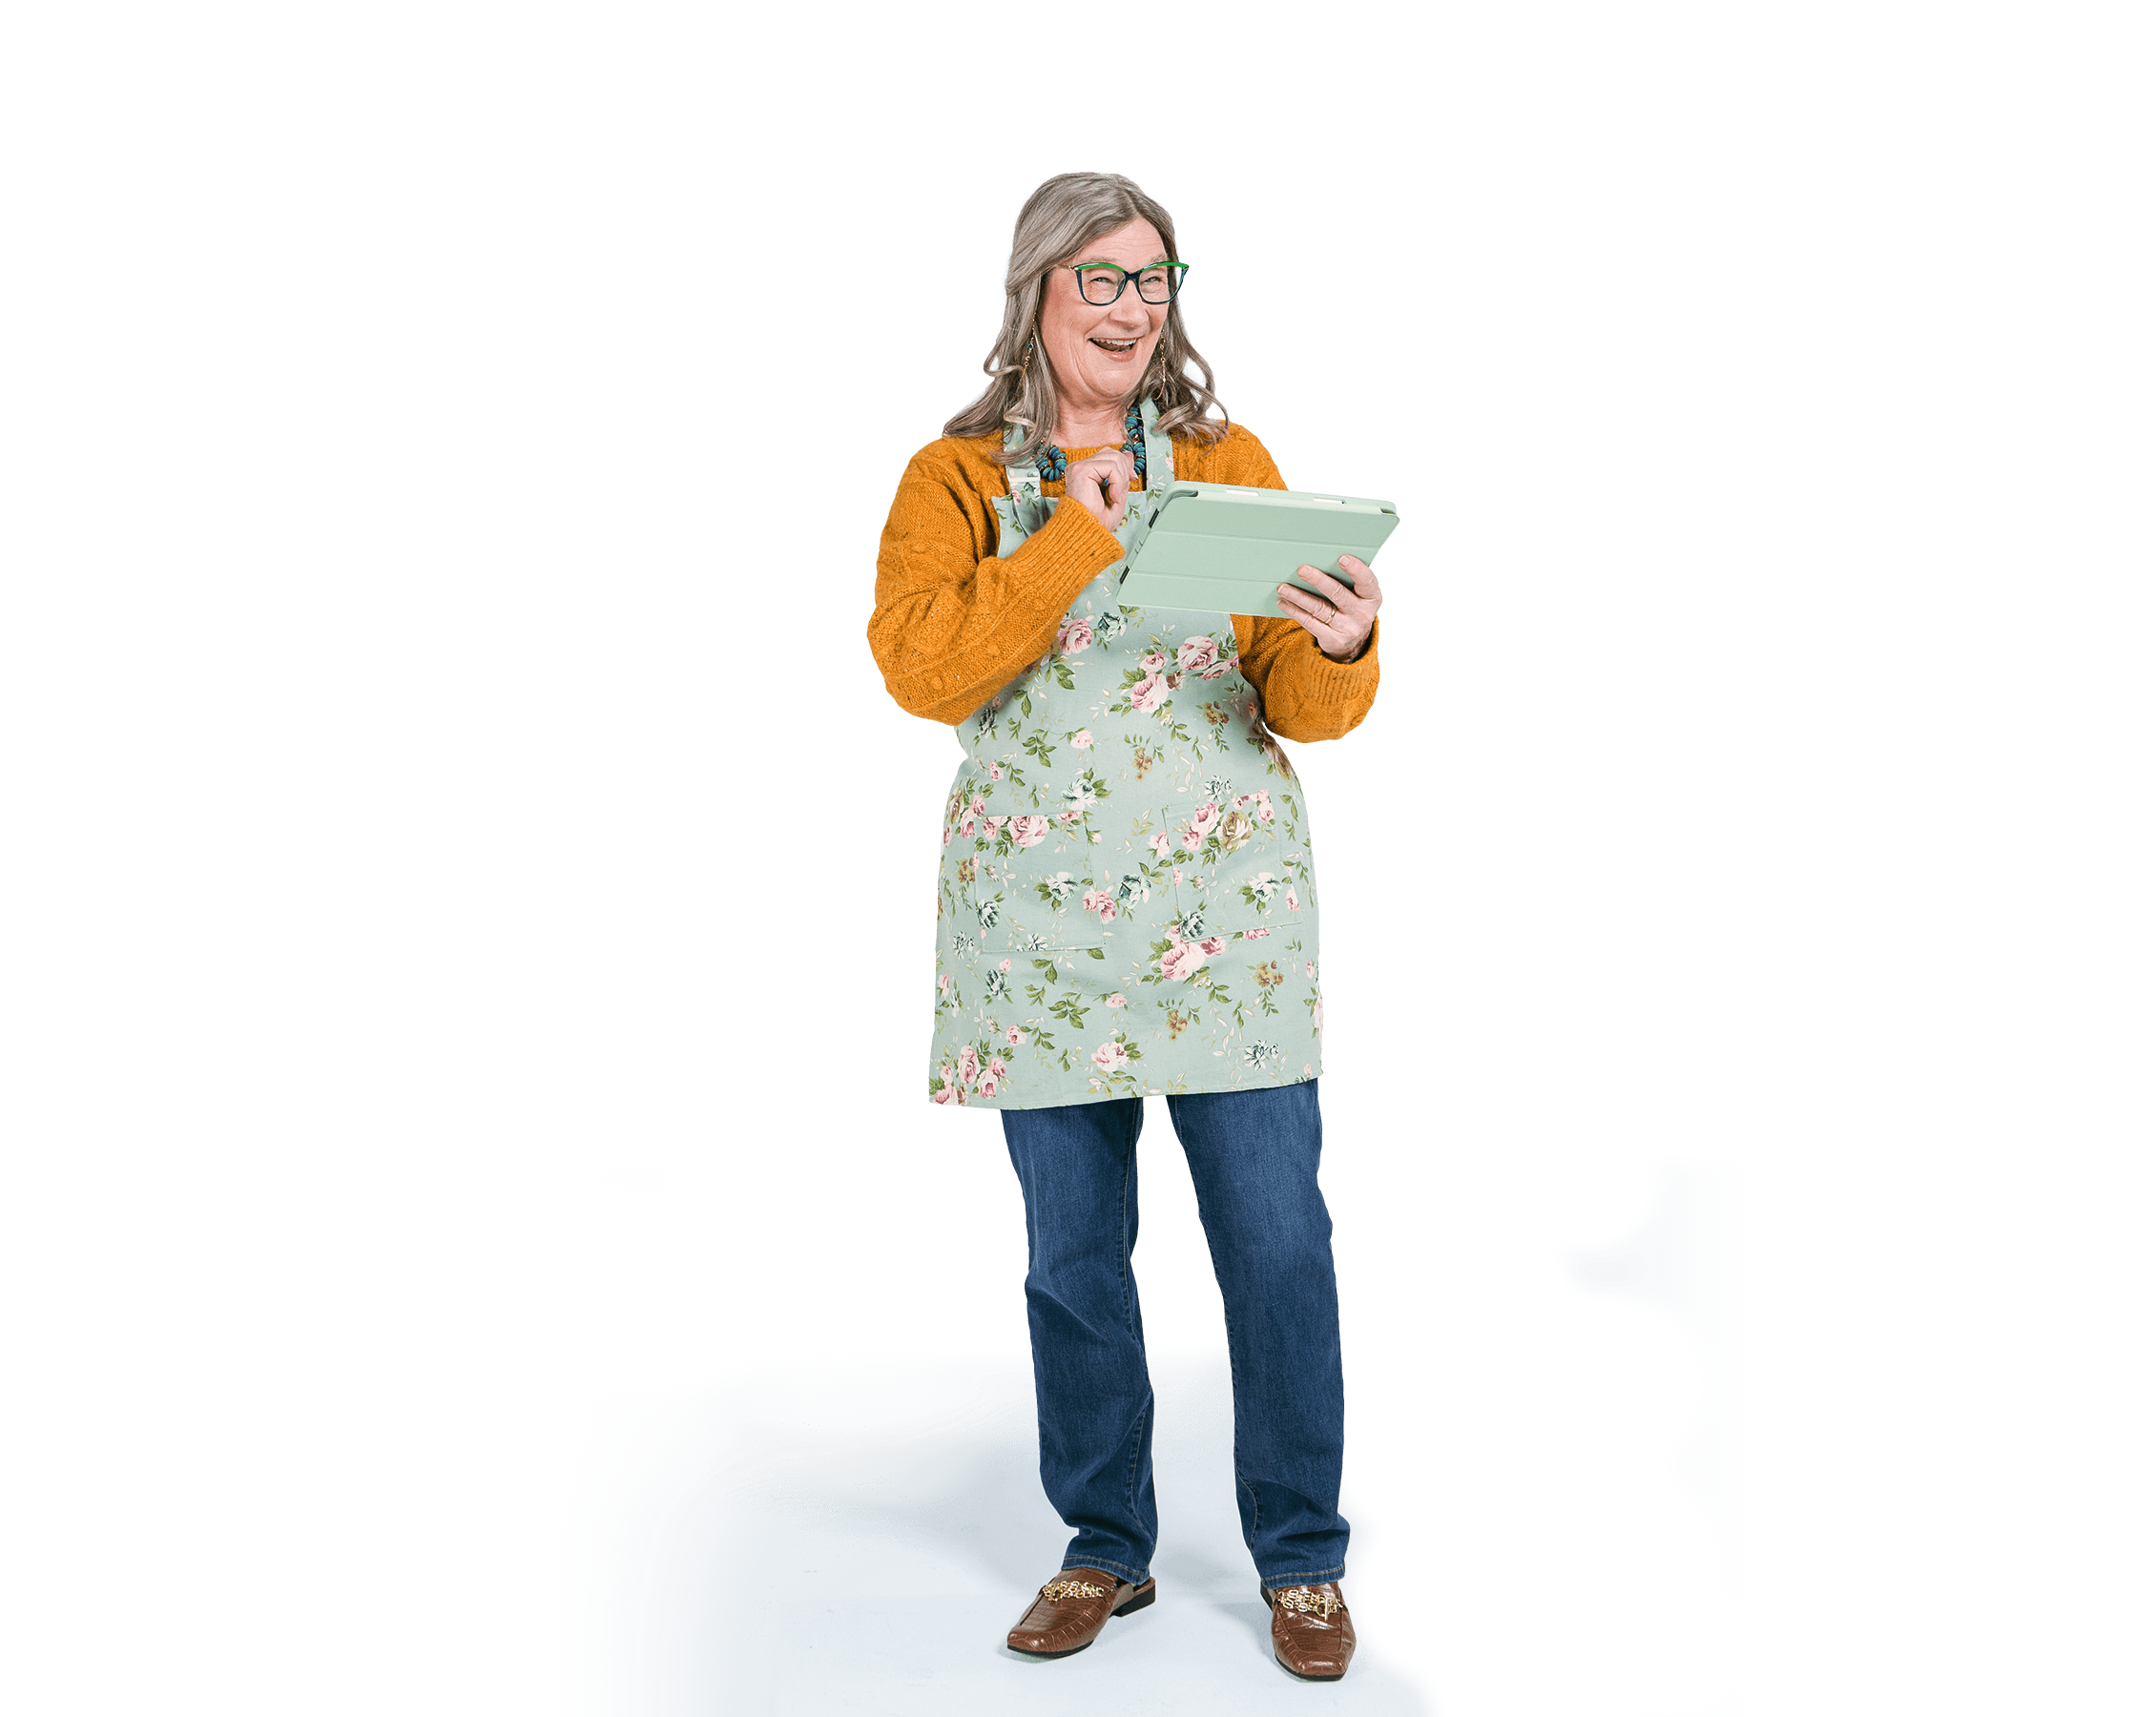 Woman with gray hair and glasses wearing an apron smiling and using a tablet